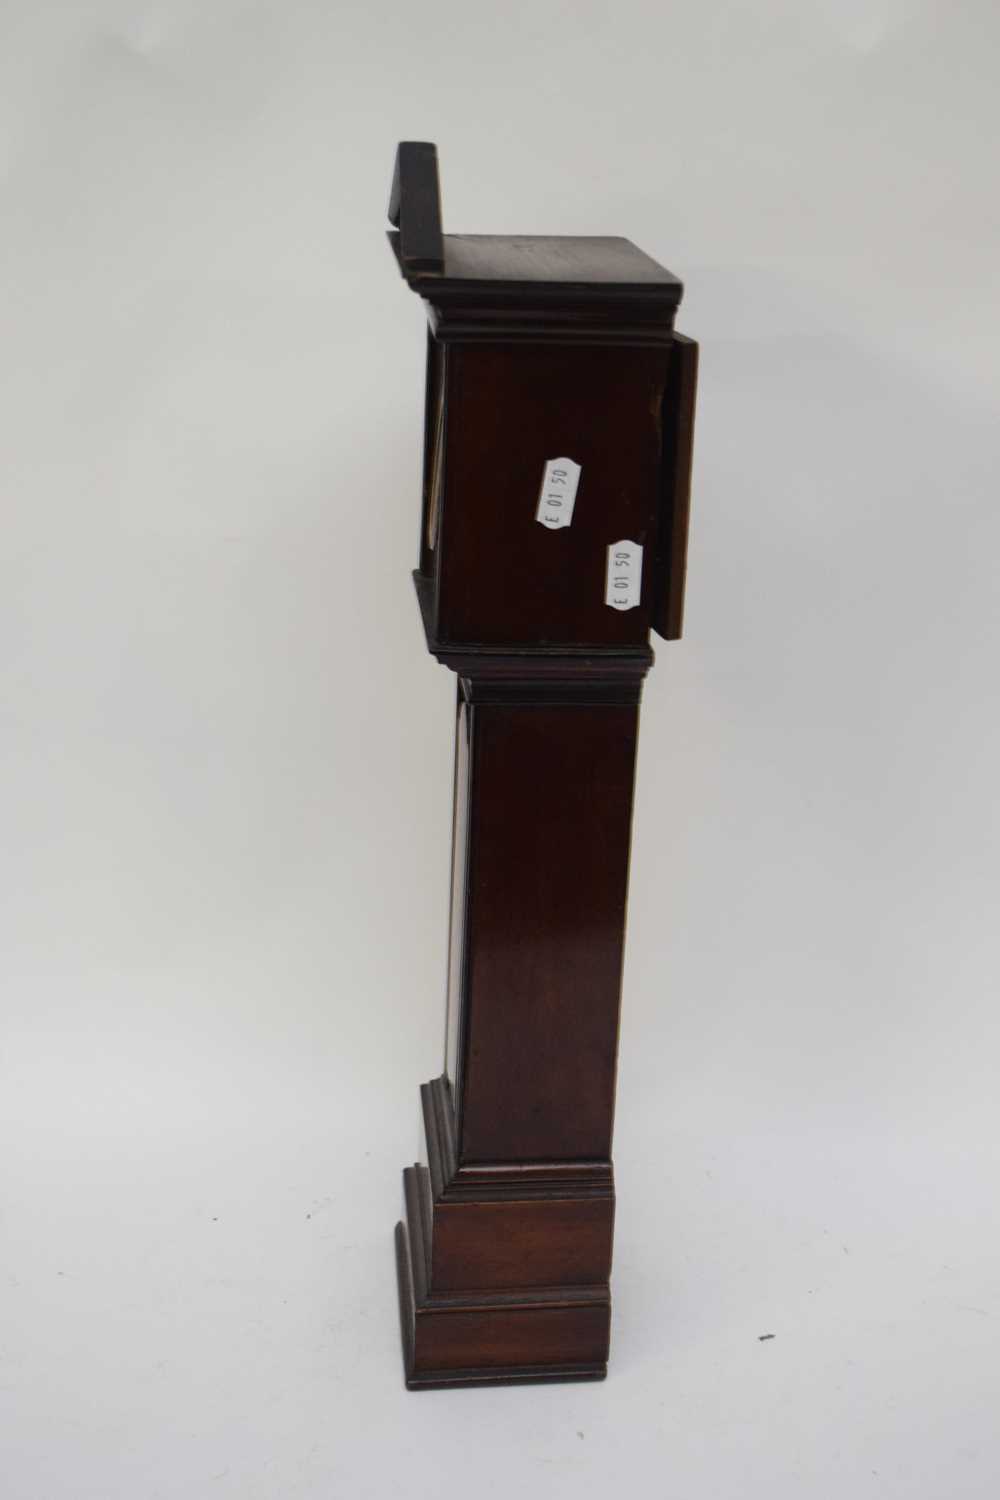 Late 19th/early 20th century miniature longcase clock in architectural case fitted with a keyless - Image 2 of 5